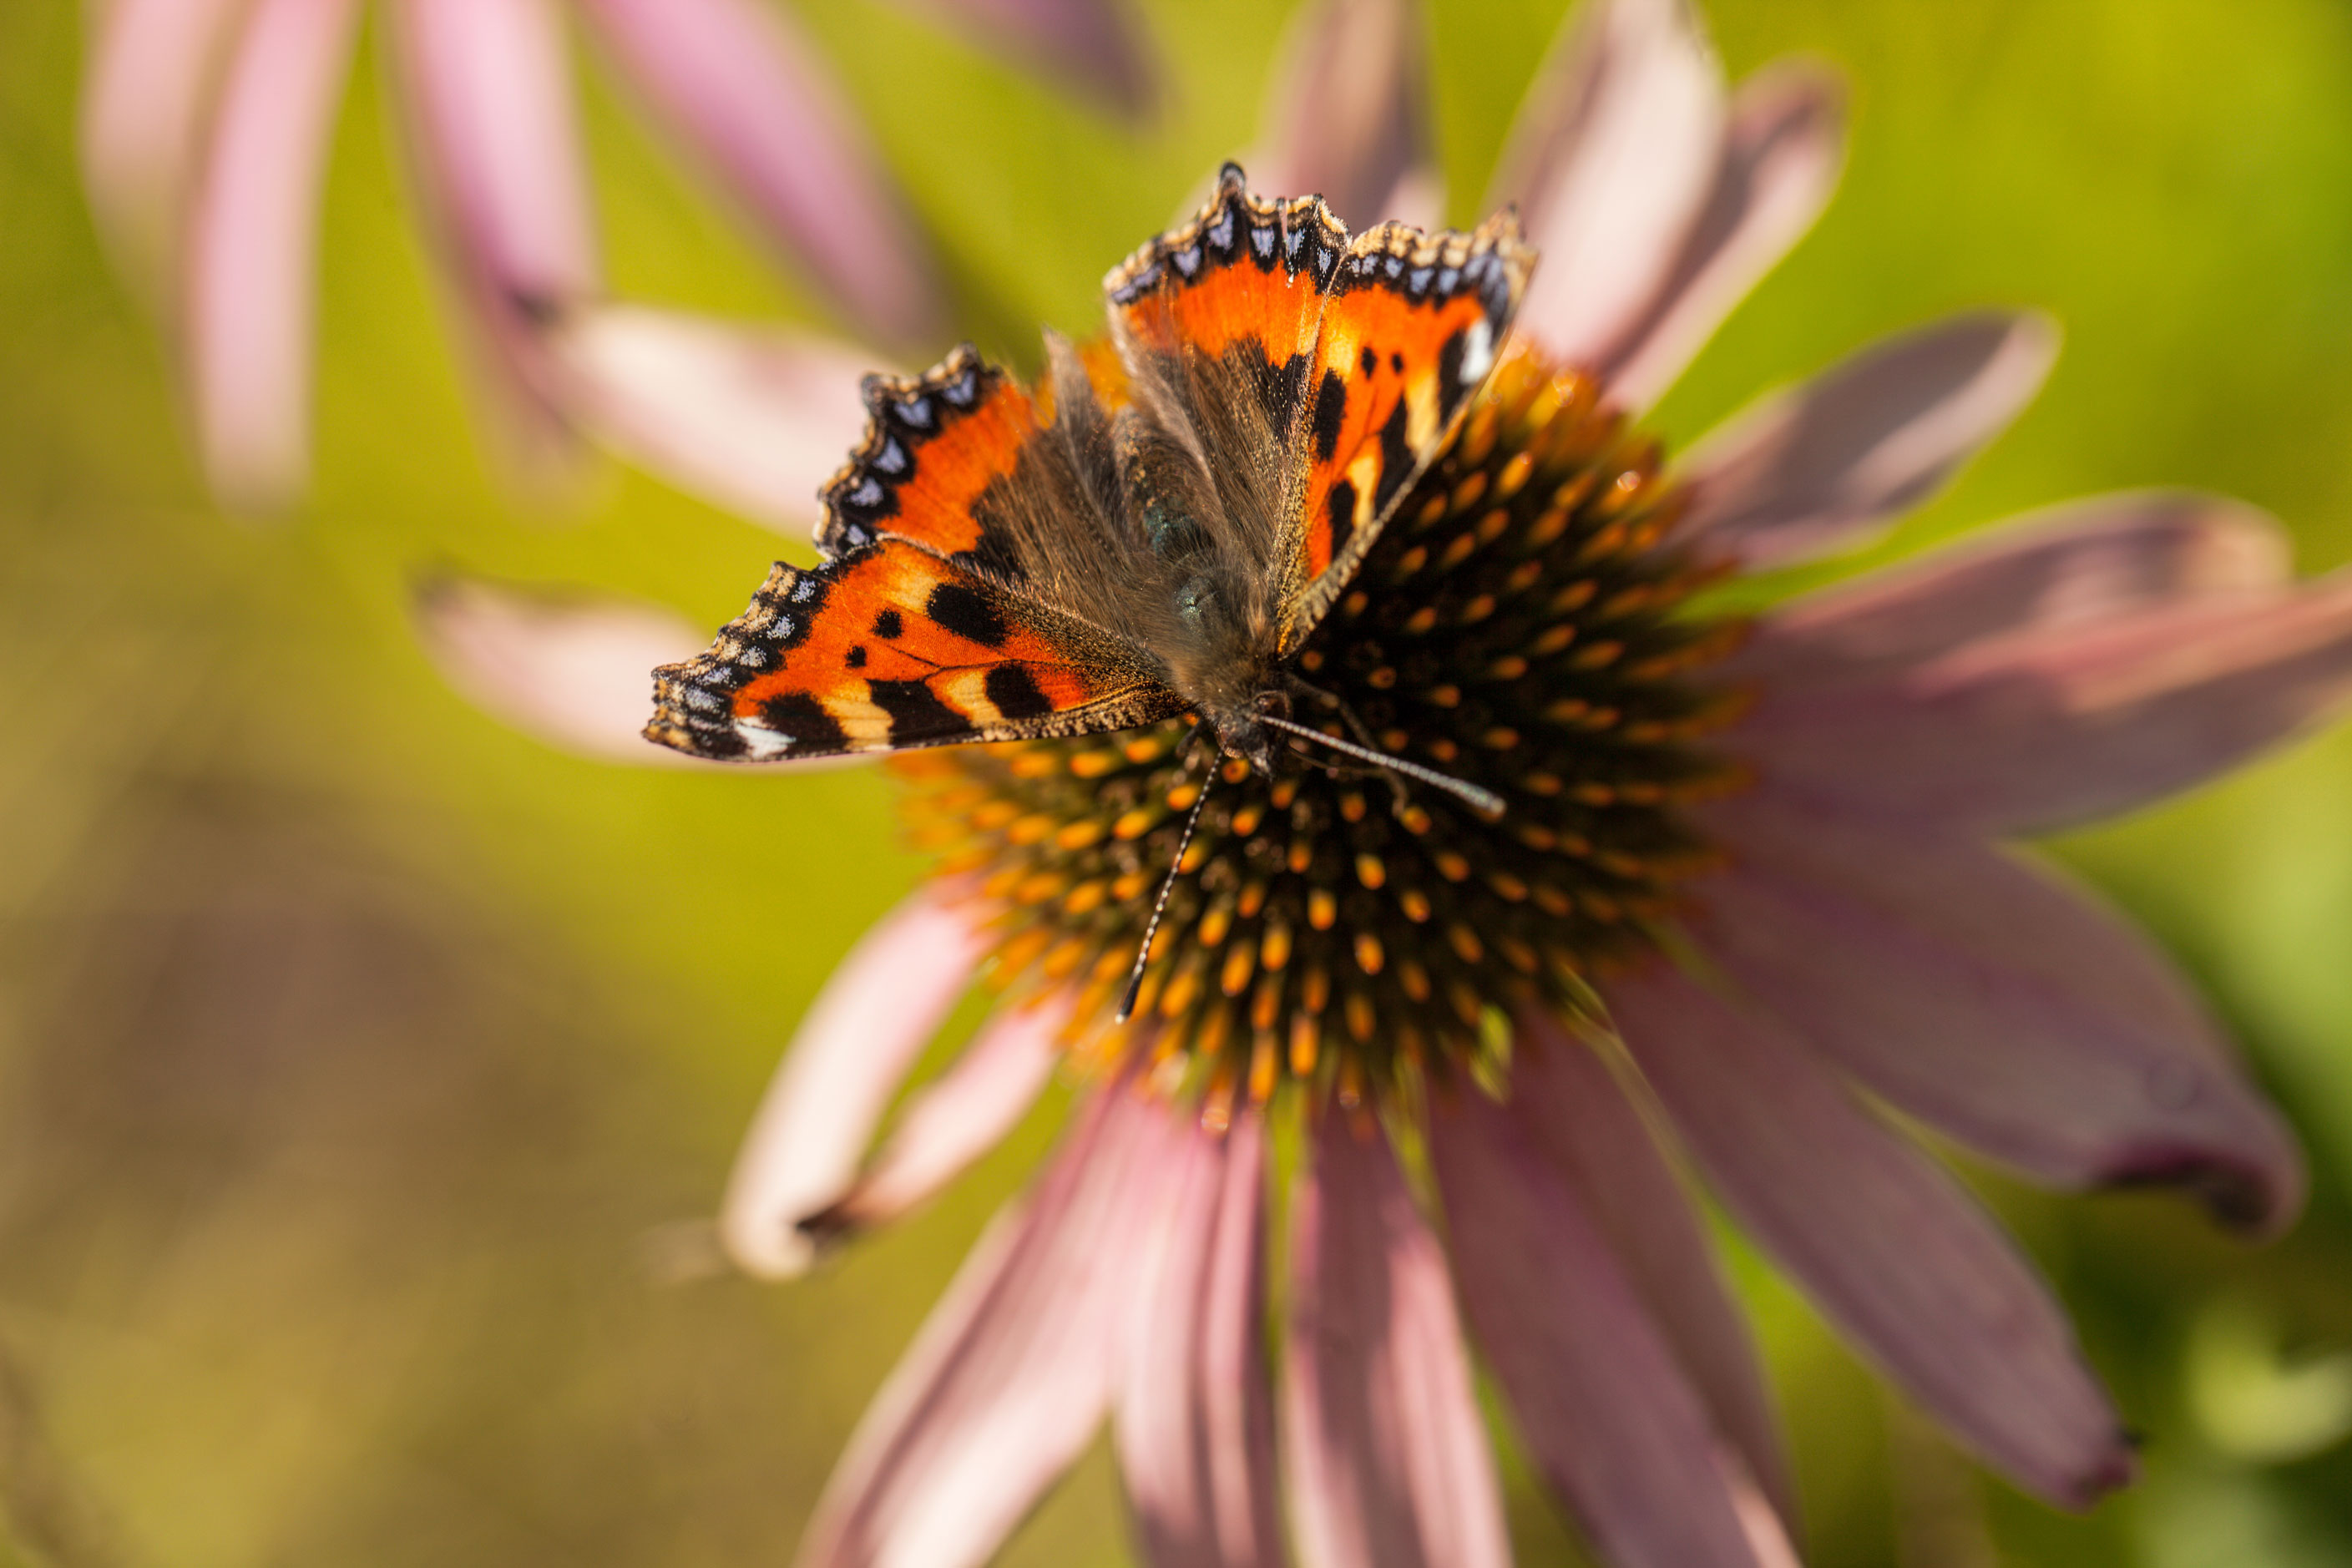 Echinacea Magnus and tortoiseshell butterfly wildlife friendly planting design contemporary modern garden by Colm Joseph